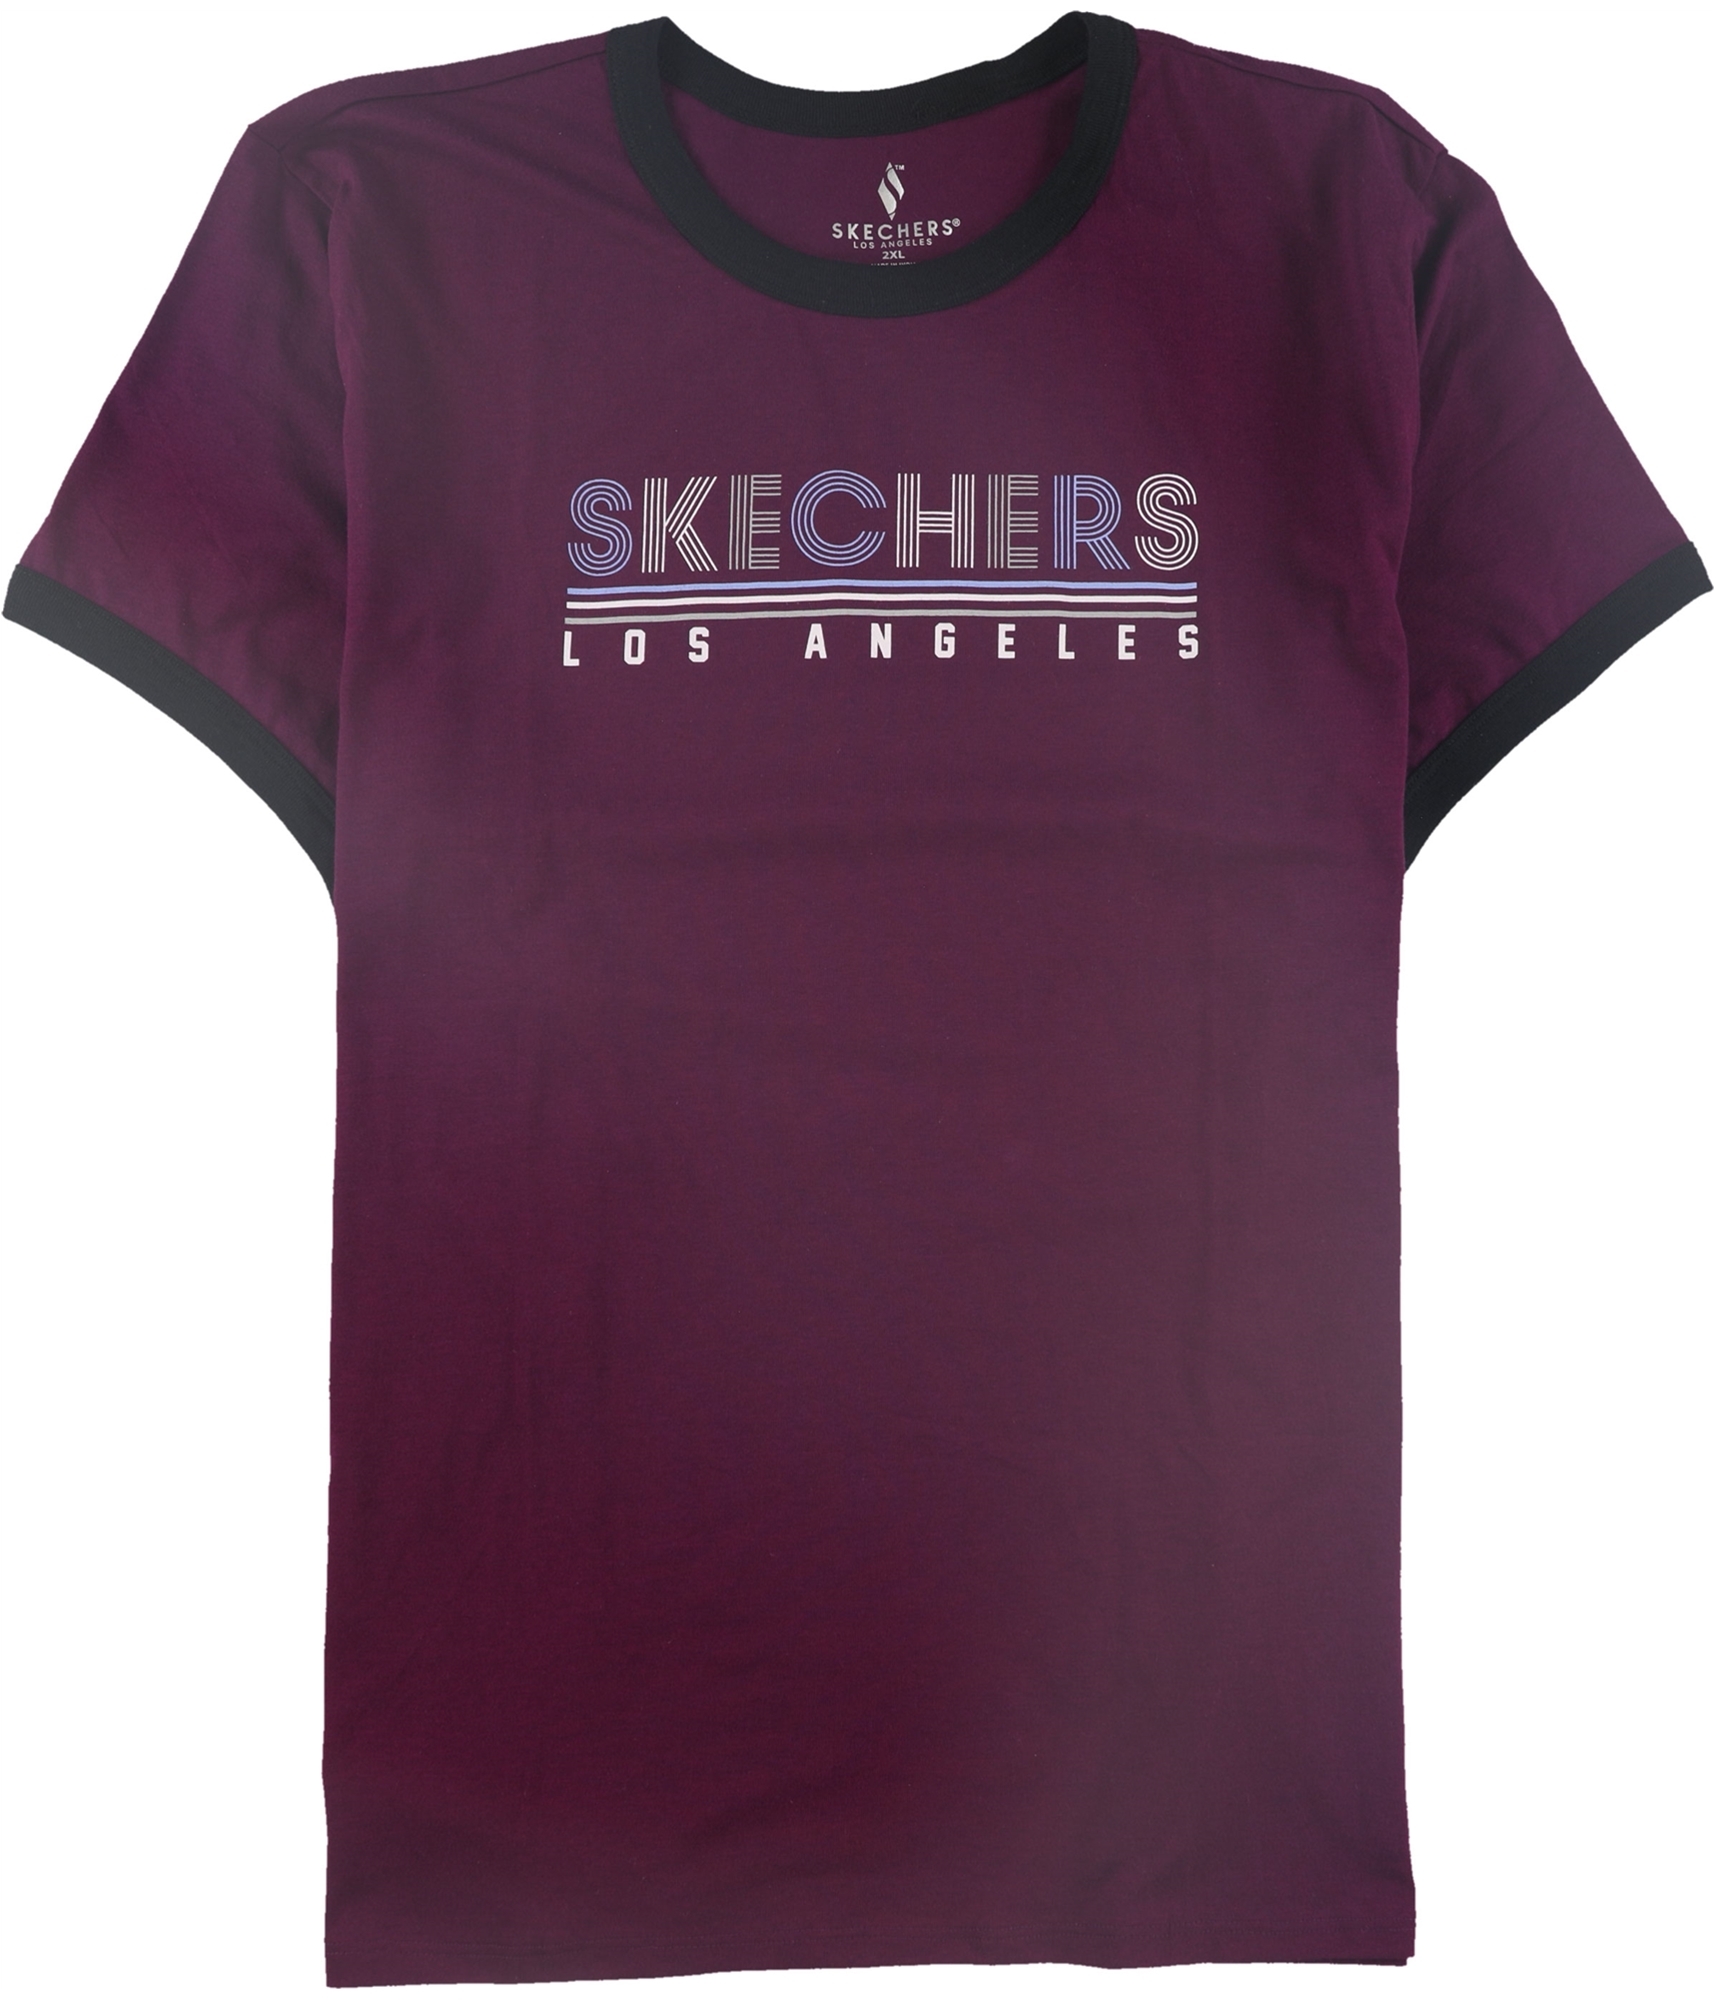 Buy a Skechers Womens Los Angeles Graphic T-Shirt | Tagsweekly